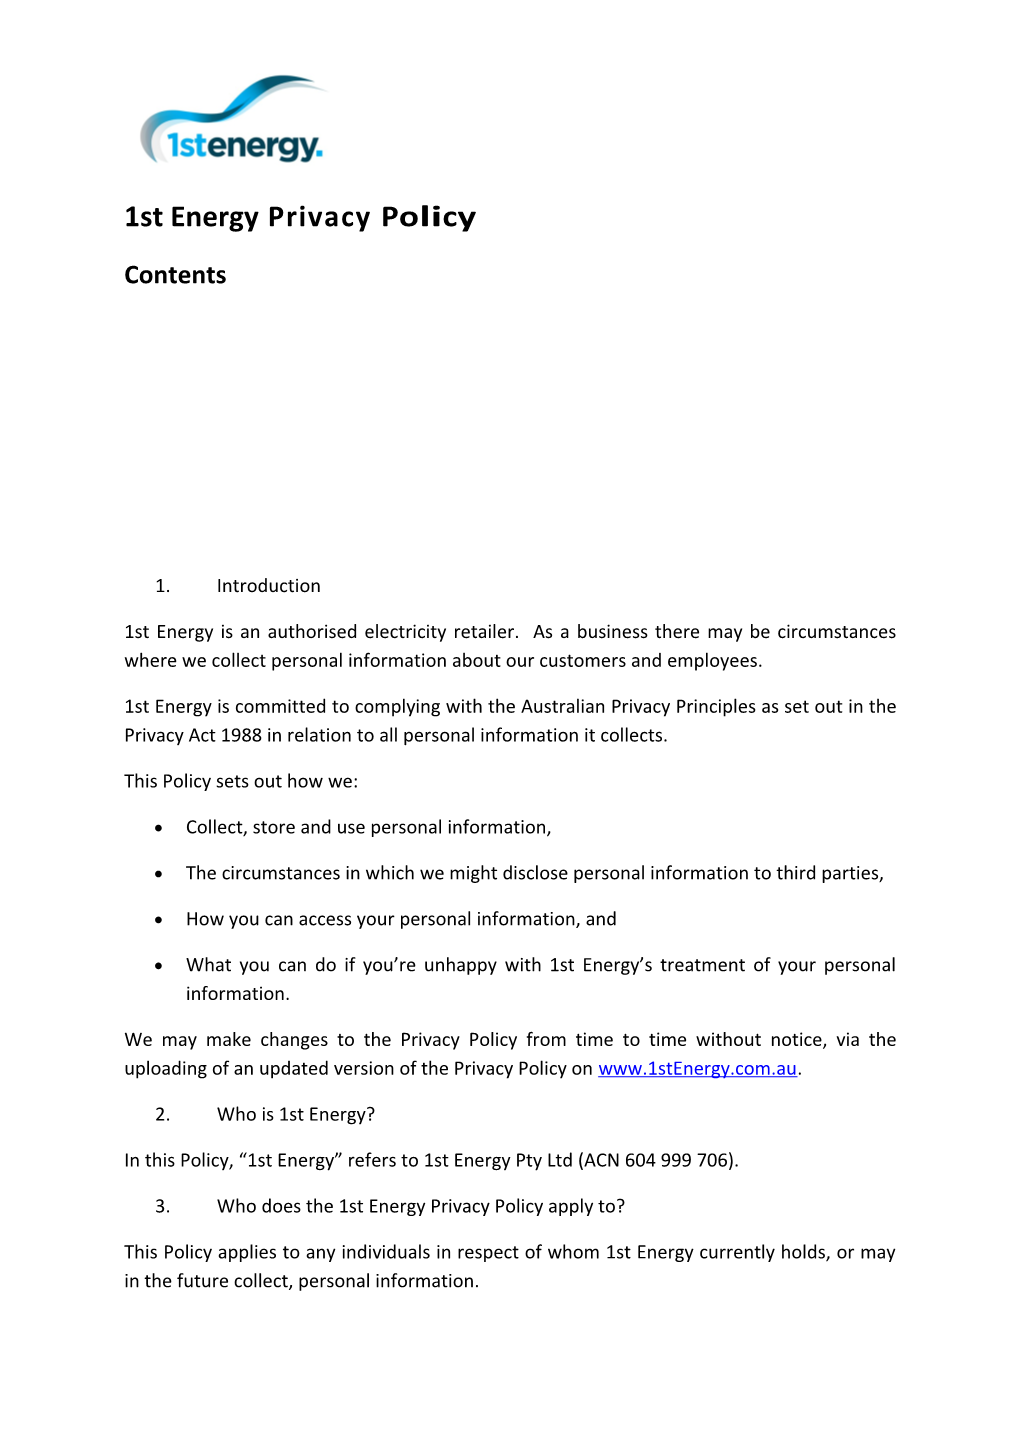 3.Who Does the 1St Energy Privacy Policy Apply To?